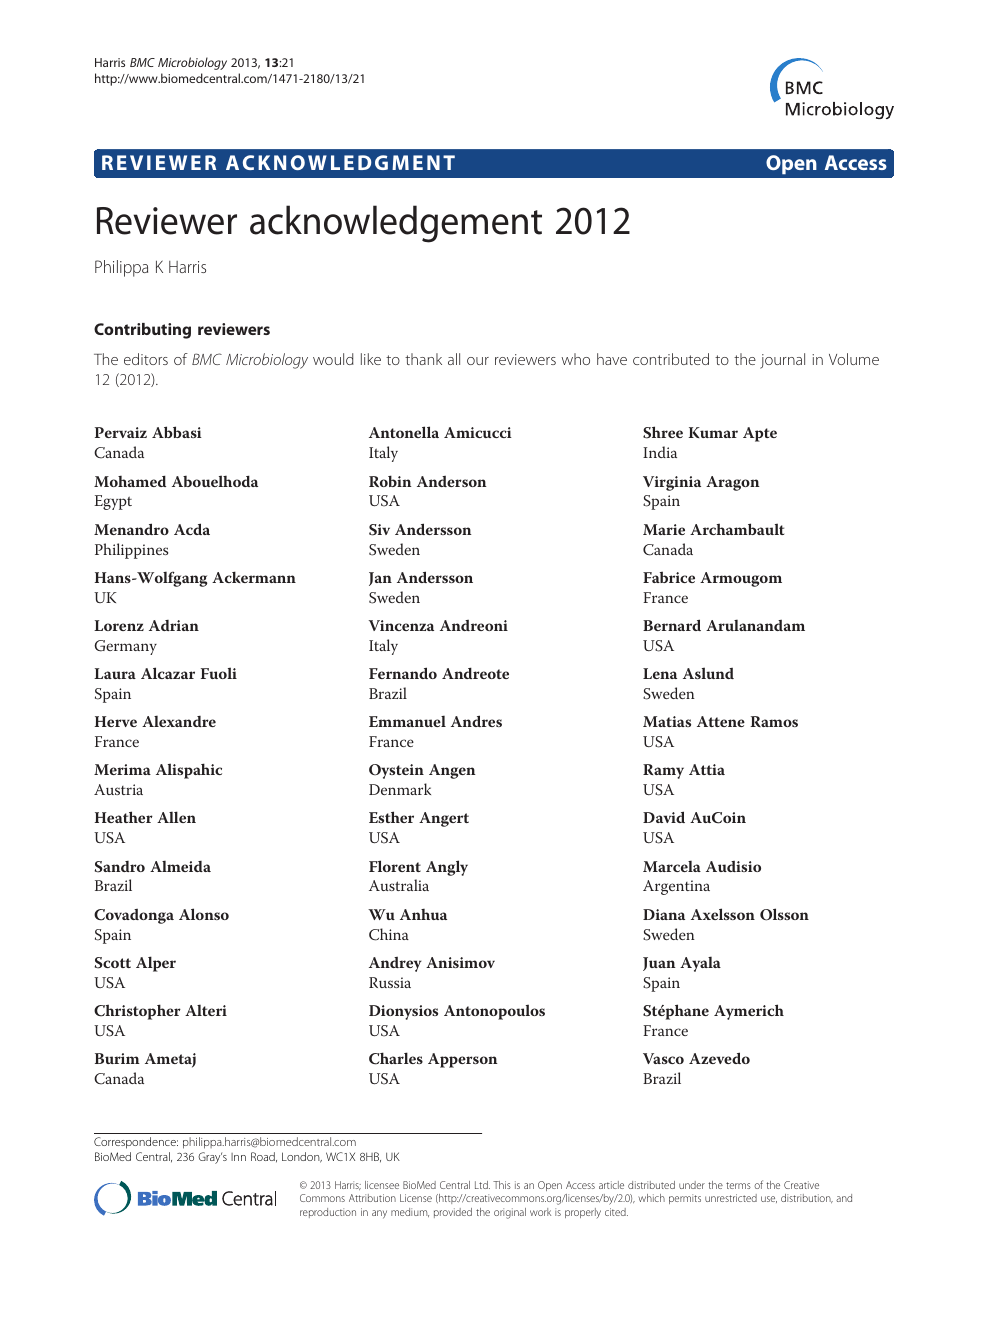 Reviewer acknowledgement 2012 – topic of research paper in Biological  sciences. Download scholarly article PDF and read for free on CyberLeninka  open science hub.